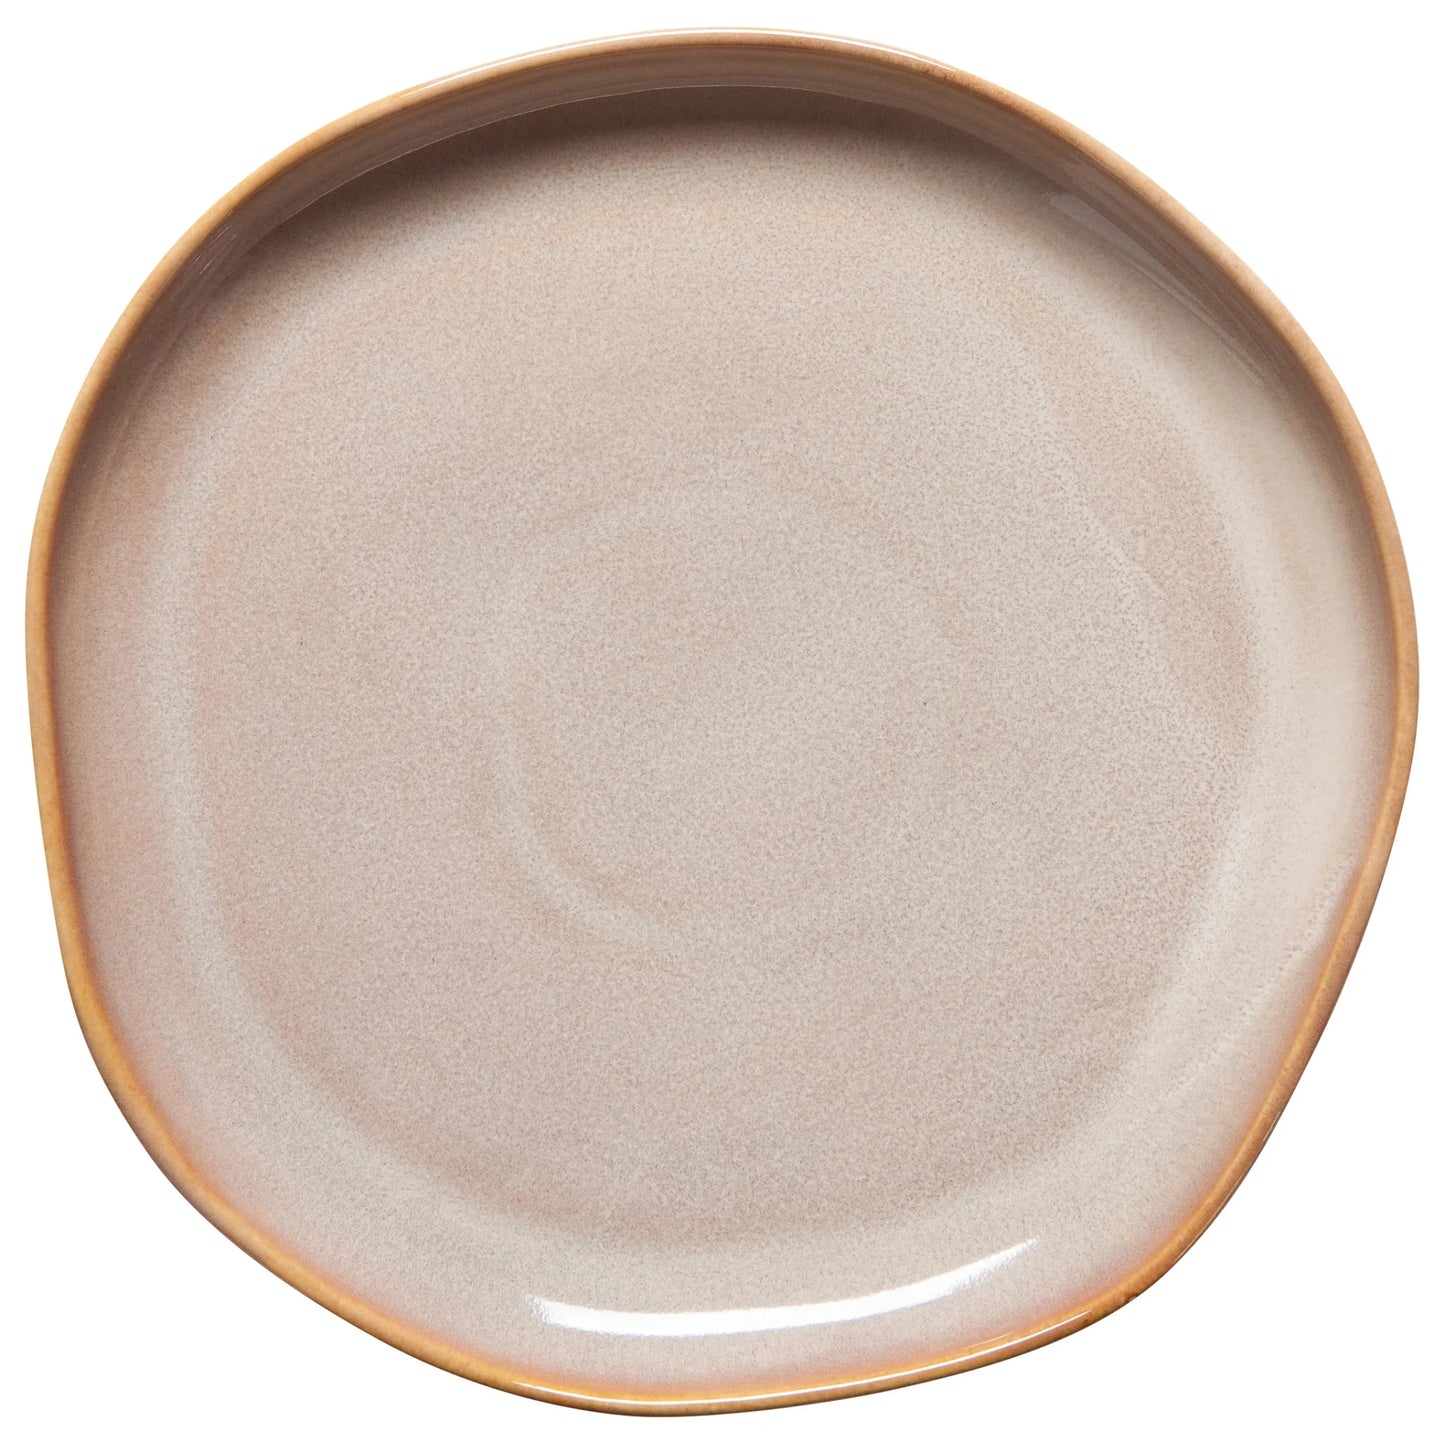 Nomad Appetizer Plate 7"